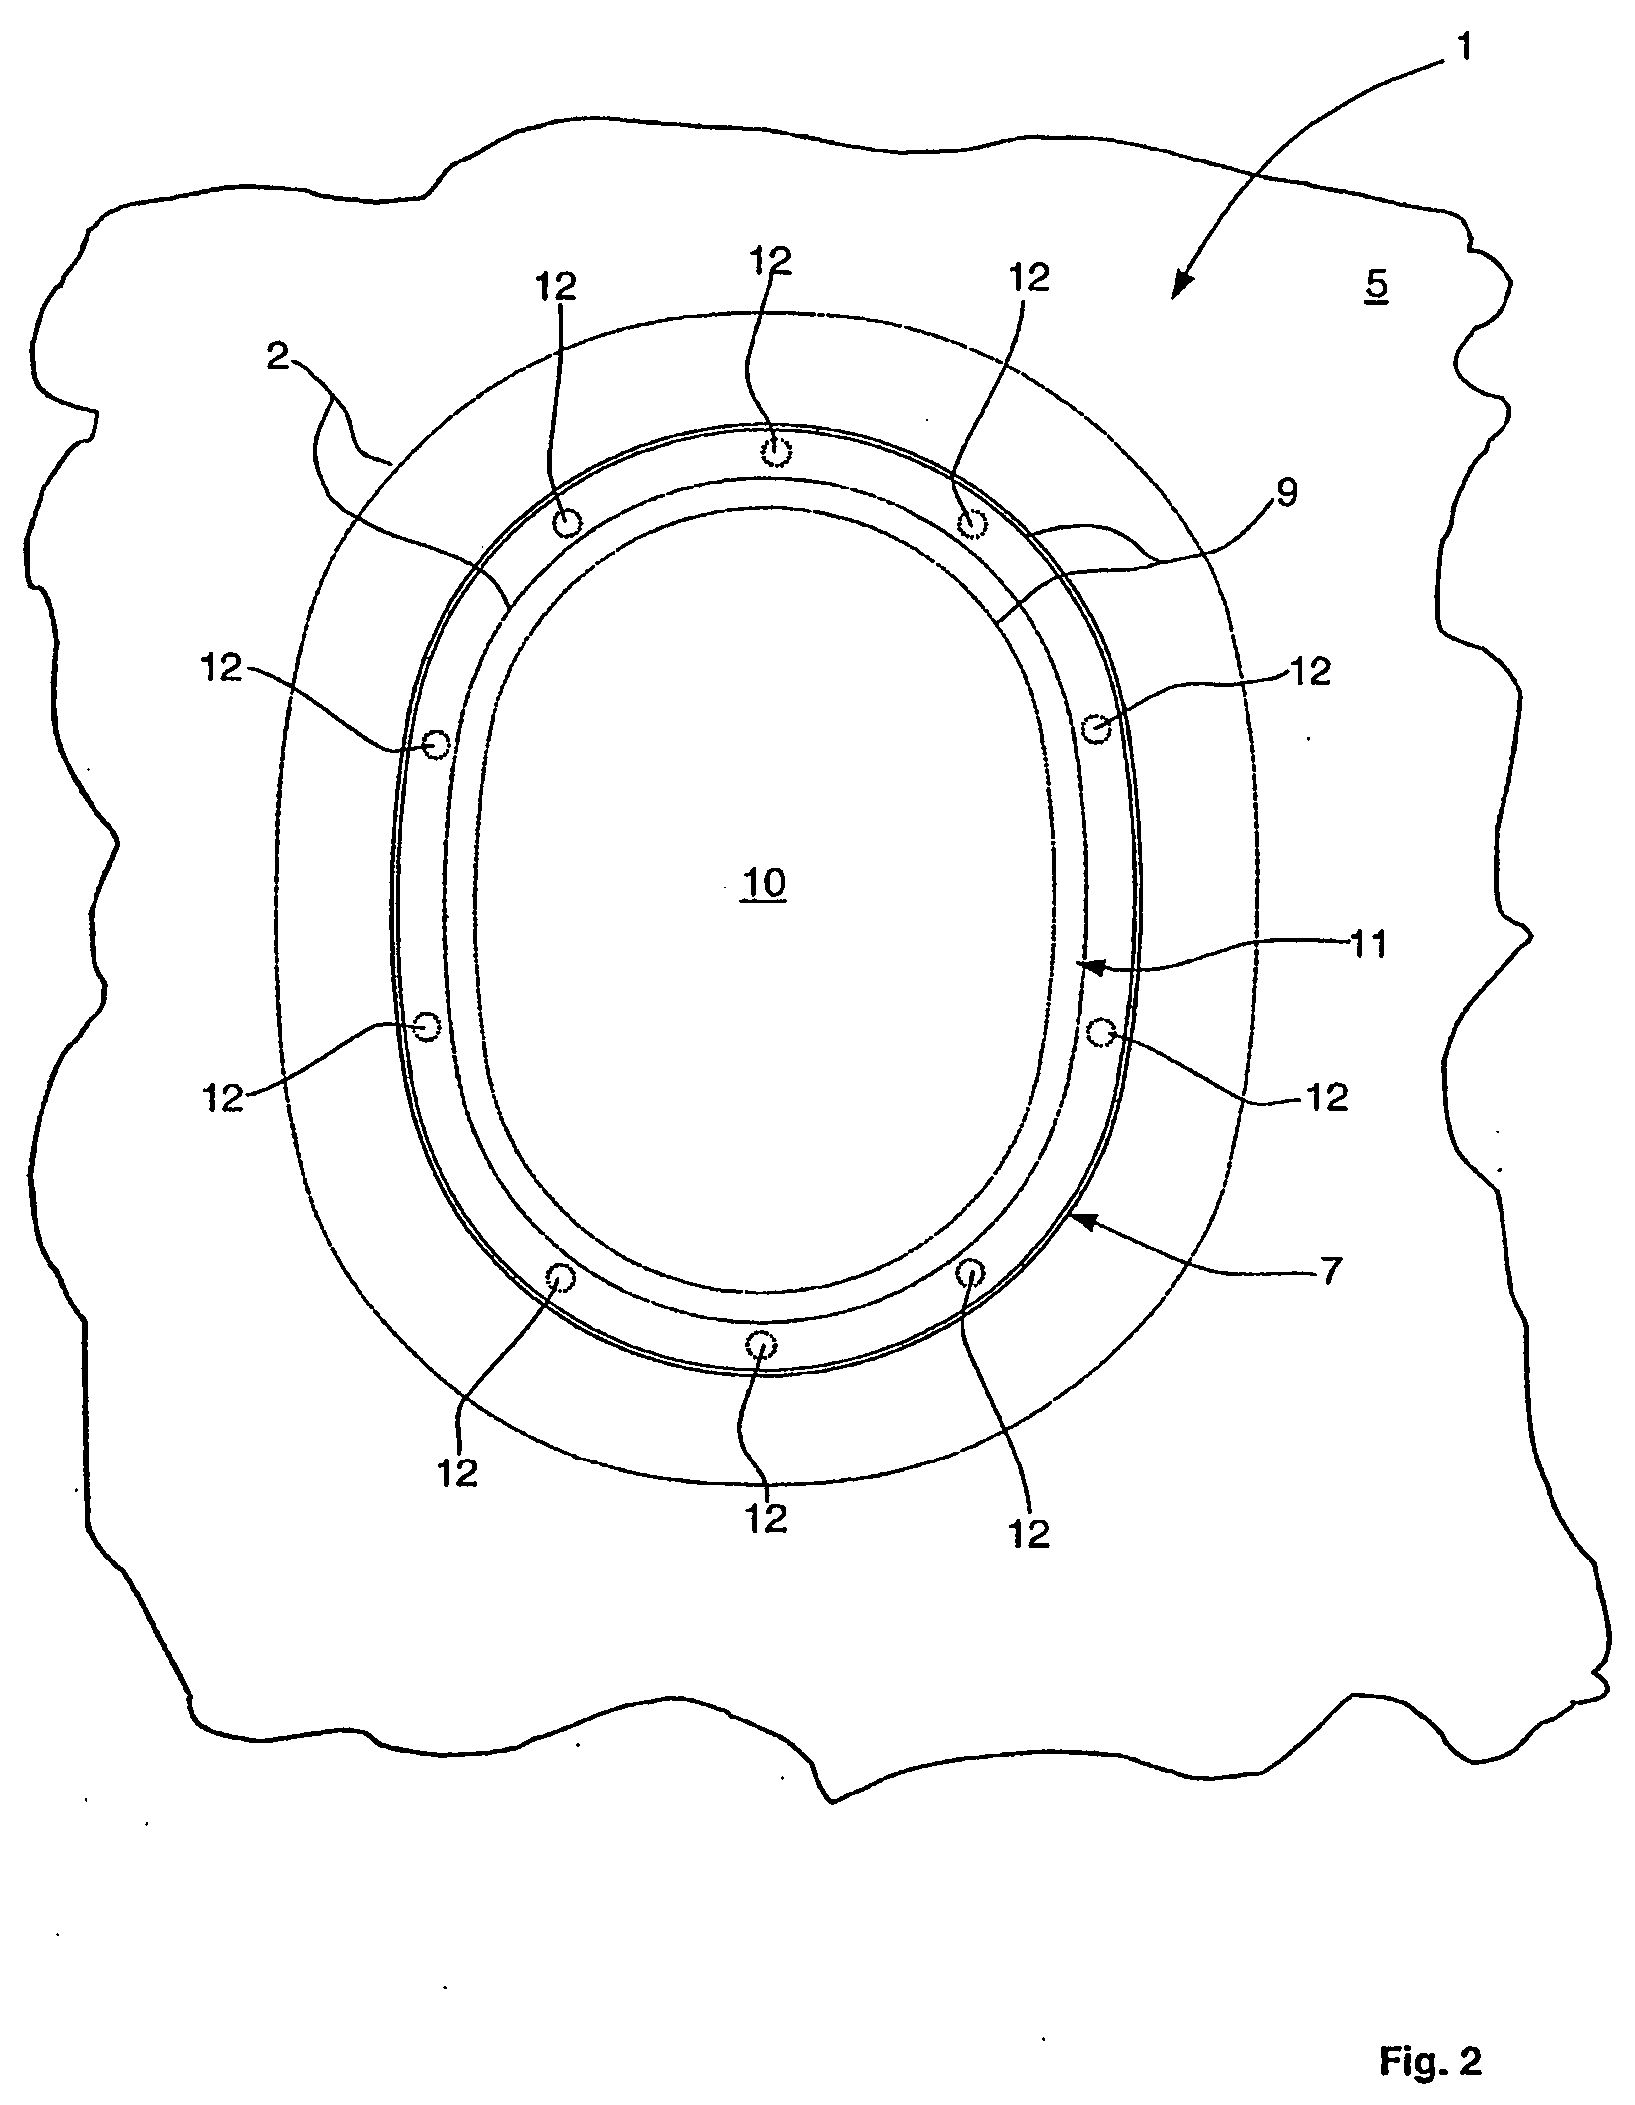 Window element for insertion in a window aperture in an outer skin of a transport